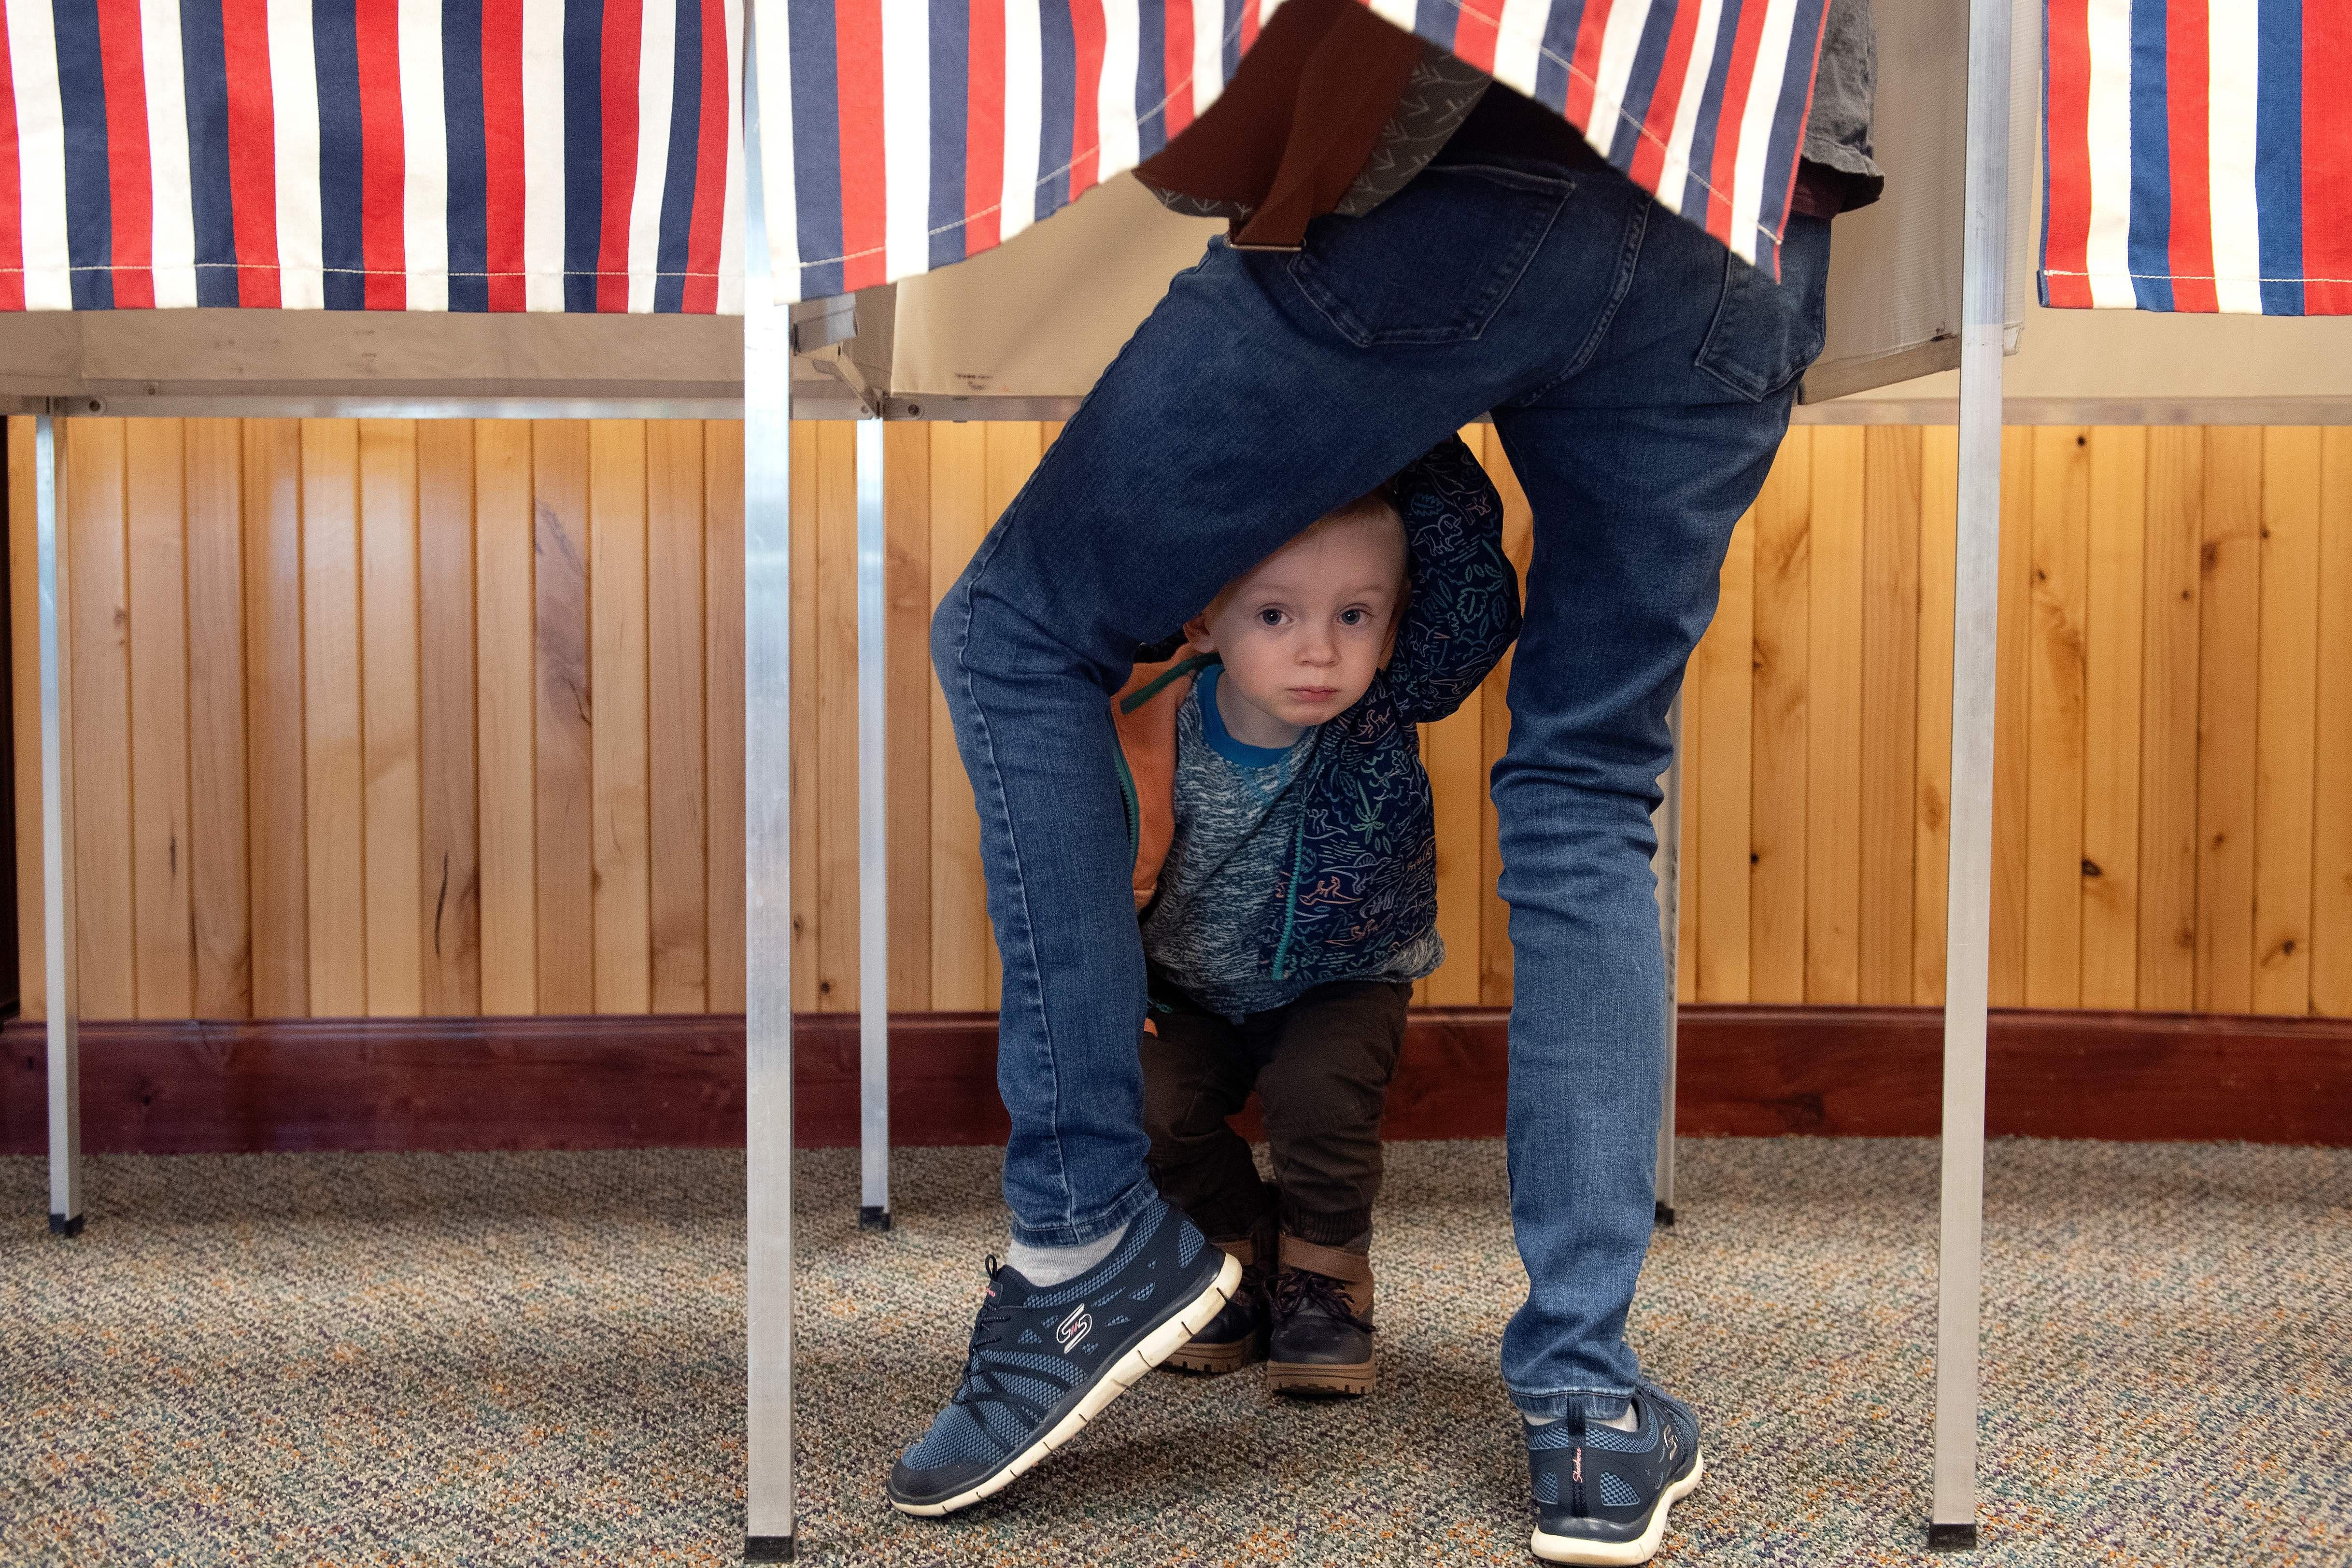 A child peeks out from between his parent's legs as the parent casts a ballot in a voting booth in a wood-paneled room